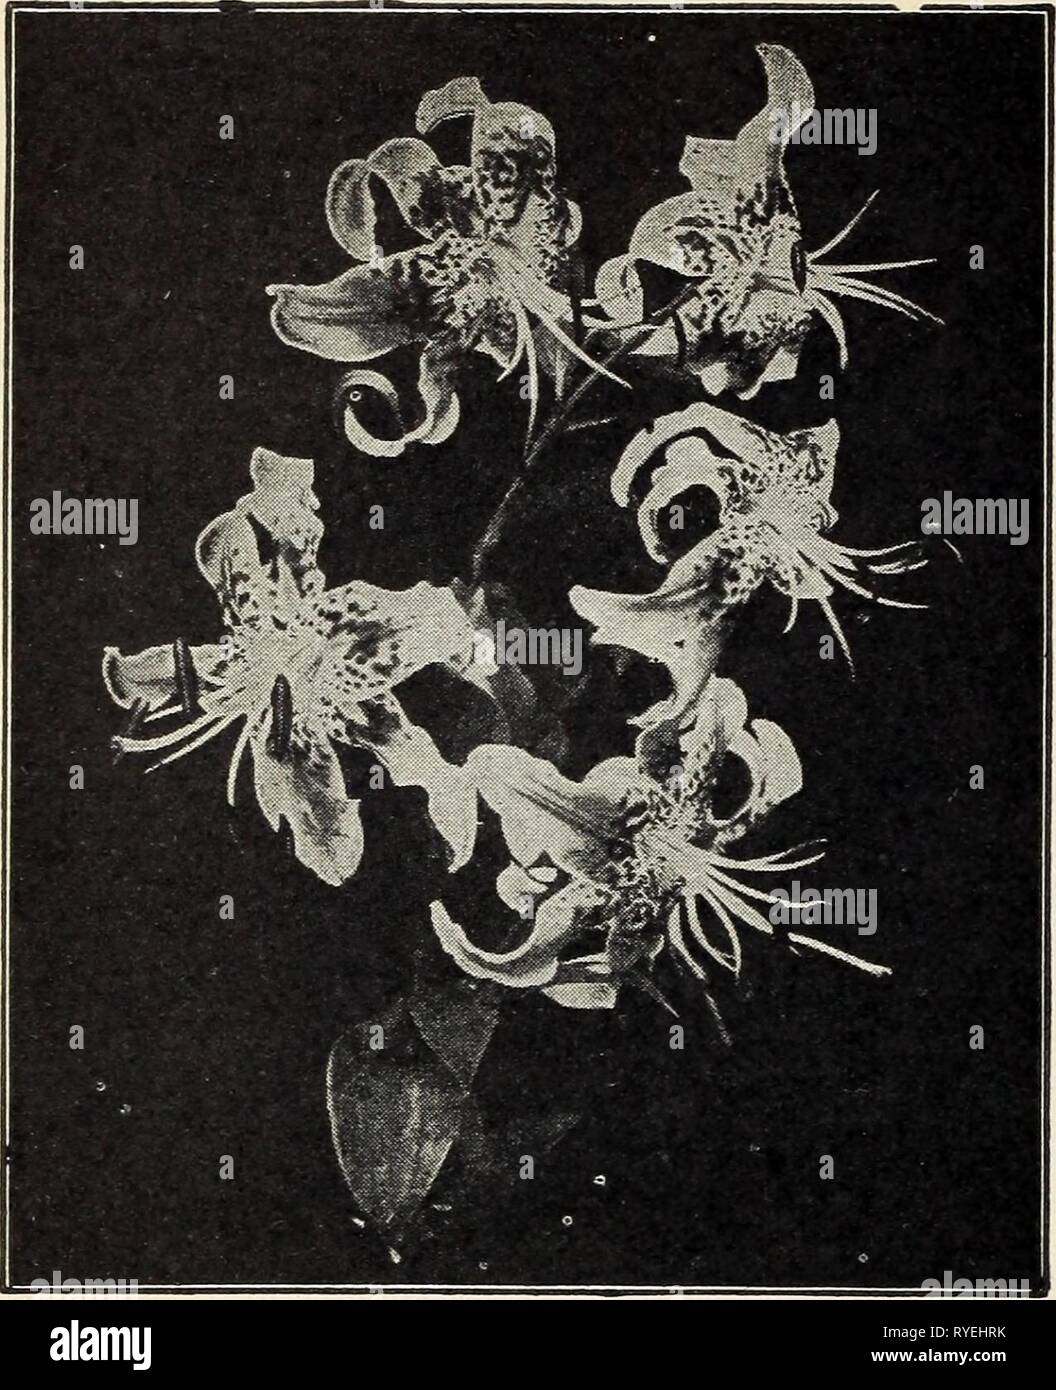 Dutch bulbs for spring blooming  dutchbulbsforspr1928wwba Year: 1928  16 Florists' Price List — Fall 1928 — The W. W. Barnard Co., 3942 S. Federal St.. Chicaso    Iillium Bubrum LILIUM SPECIOSUM (LANCE-LEAVED LILY} These lilies are probably the most popular of all, succeeding equally well in open border or in pots. When fully open, the petals curve gracefully on the flower, exposing the beautiful rose and crimson mark- ings, which characterize the Rubrum and Magnificum types. Speciosum Rubrum, or Roseum. White, heavily spotted with rich, rosy crimson spots. This variety is largely grown for cu Stock Photo